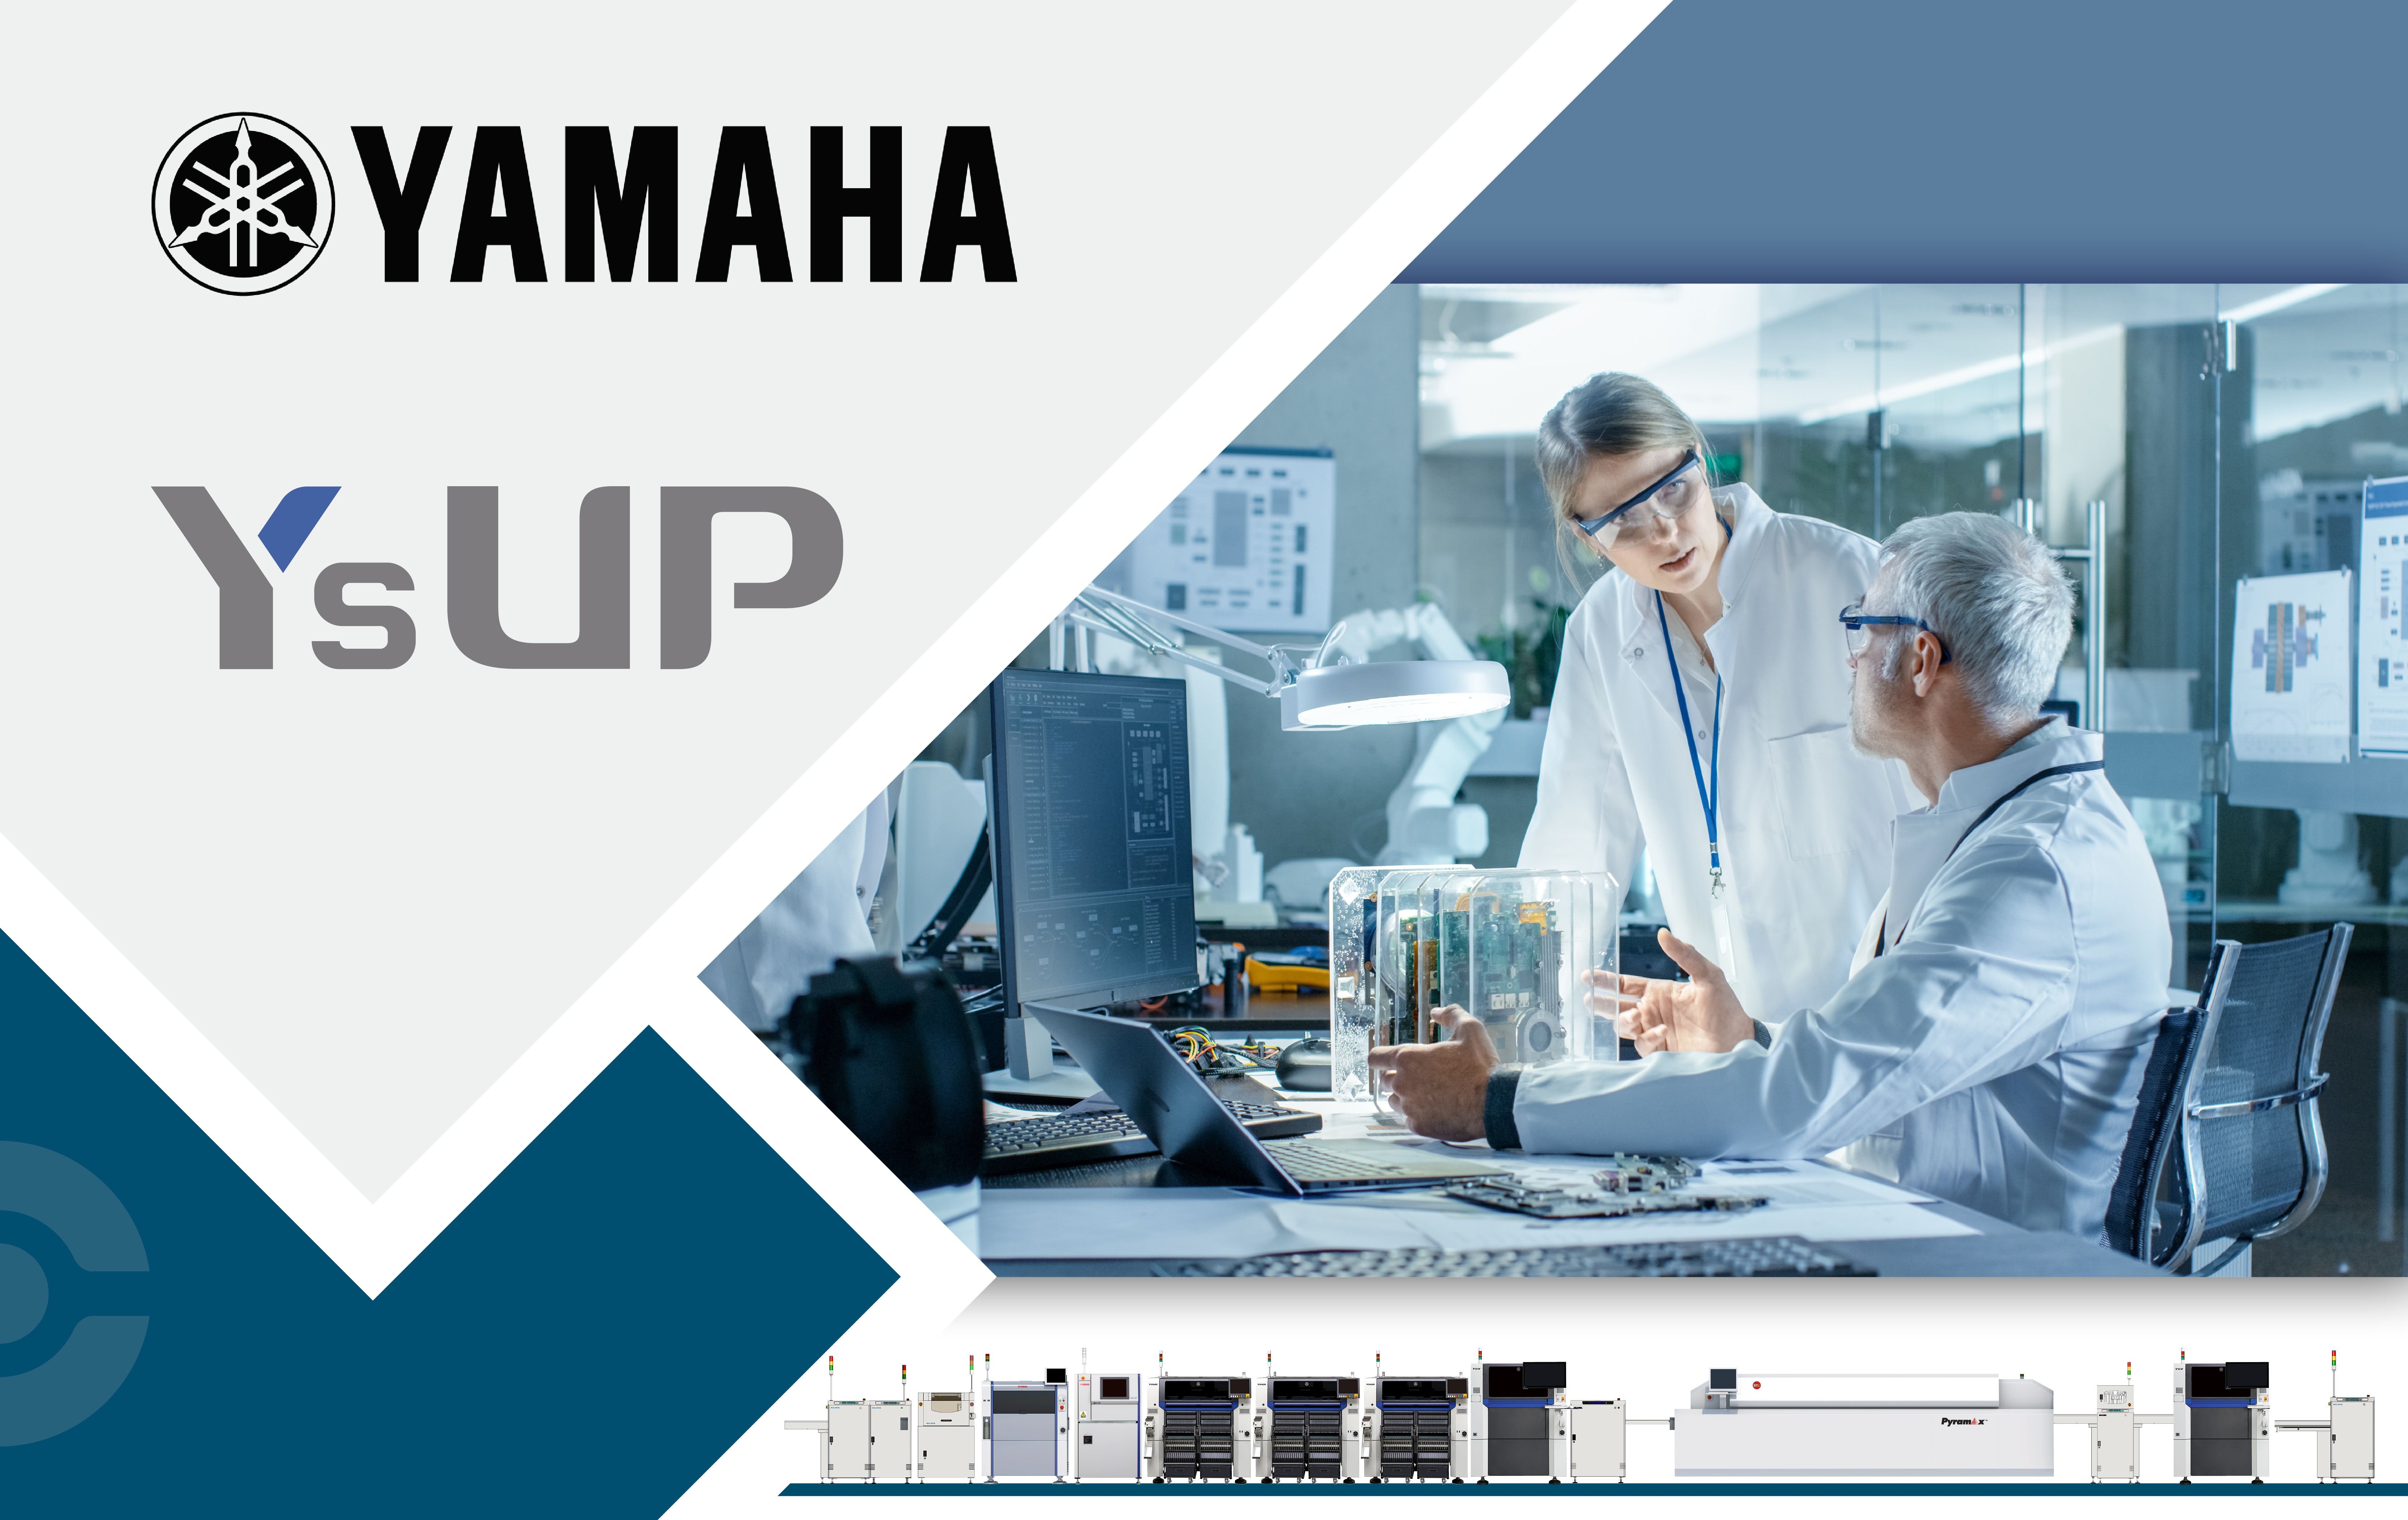 YAMAHA software for YAMAHA SMT machinery in assembly lines